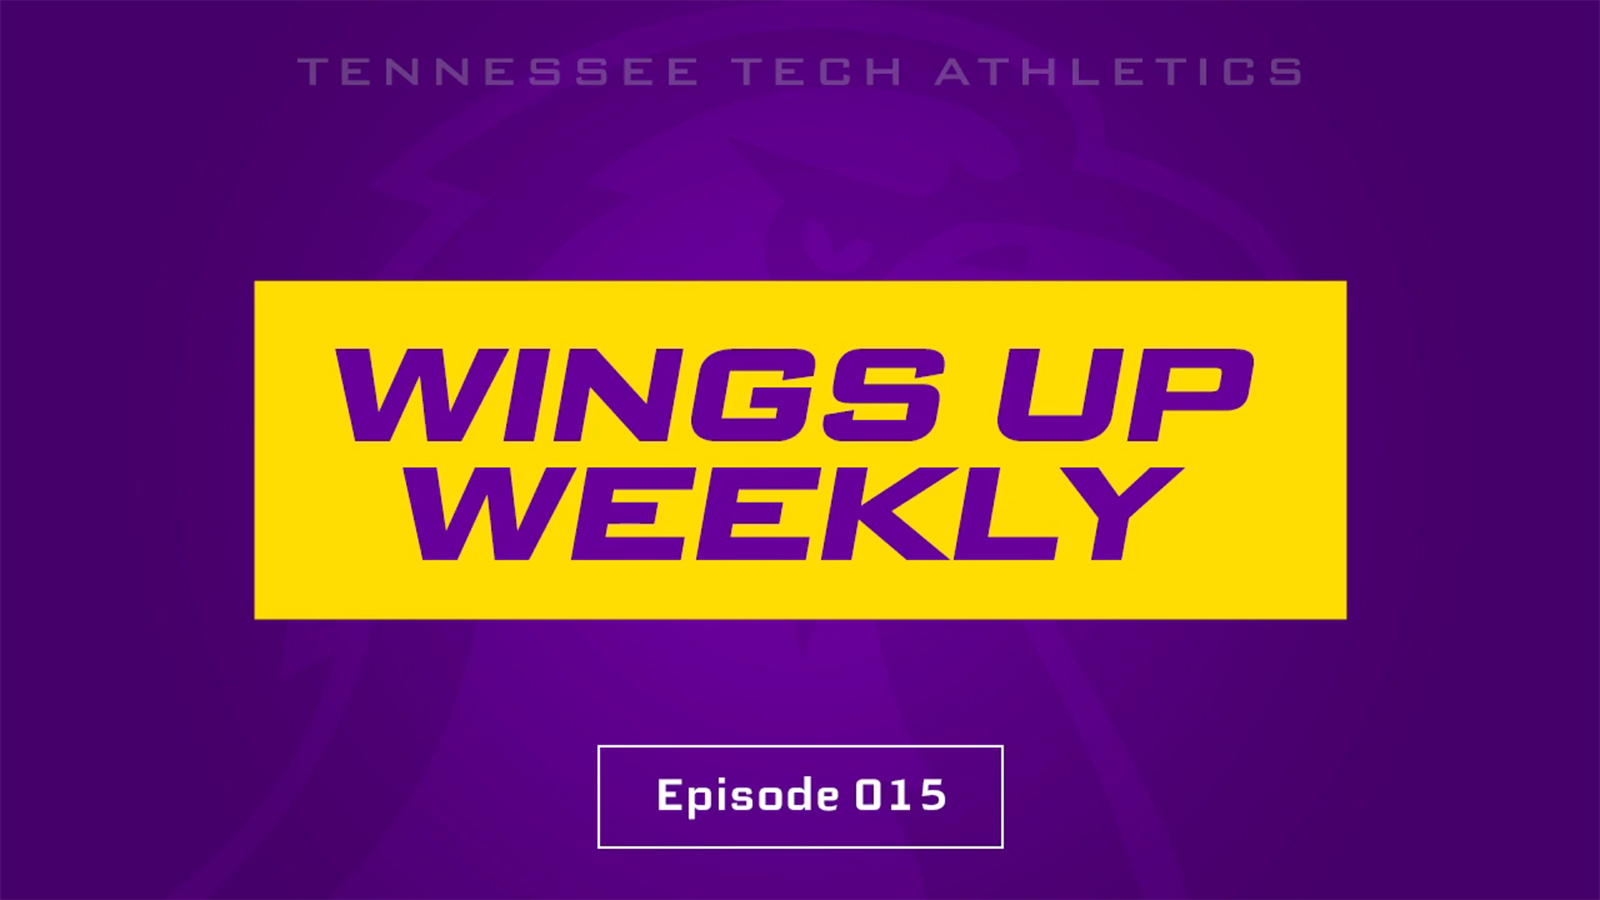 Wings Up Weekly: Episode 015 - featuring TTU senior EXPW instructor Steve Smith and members of the Tech football team